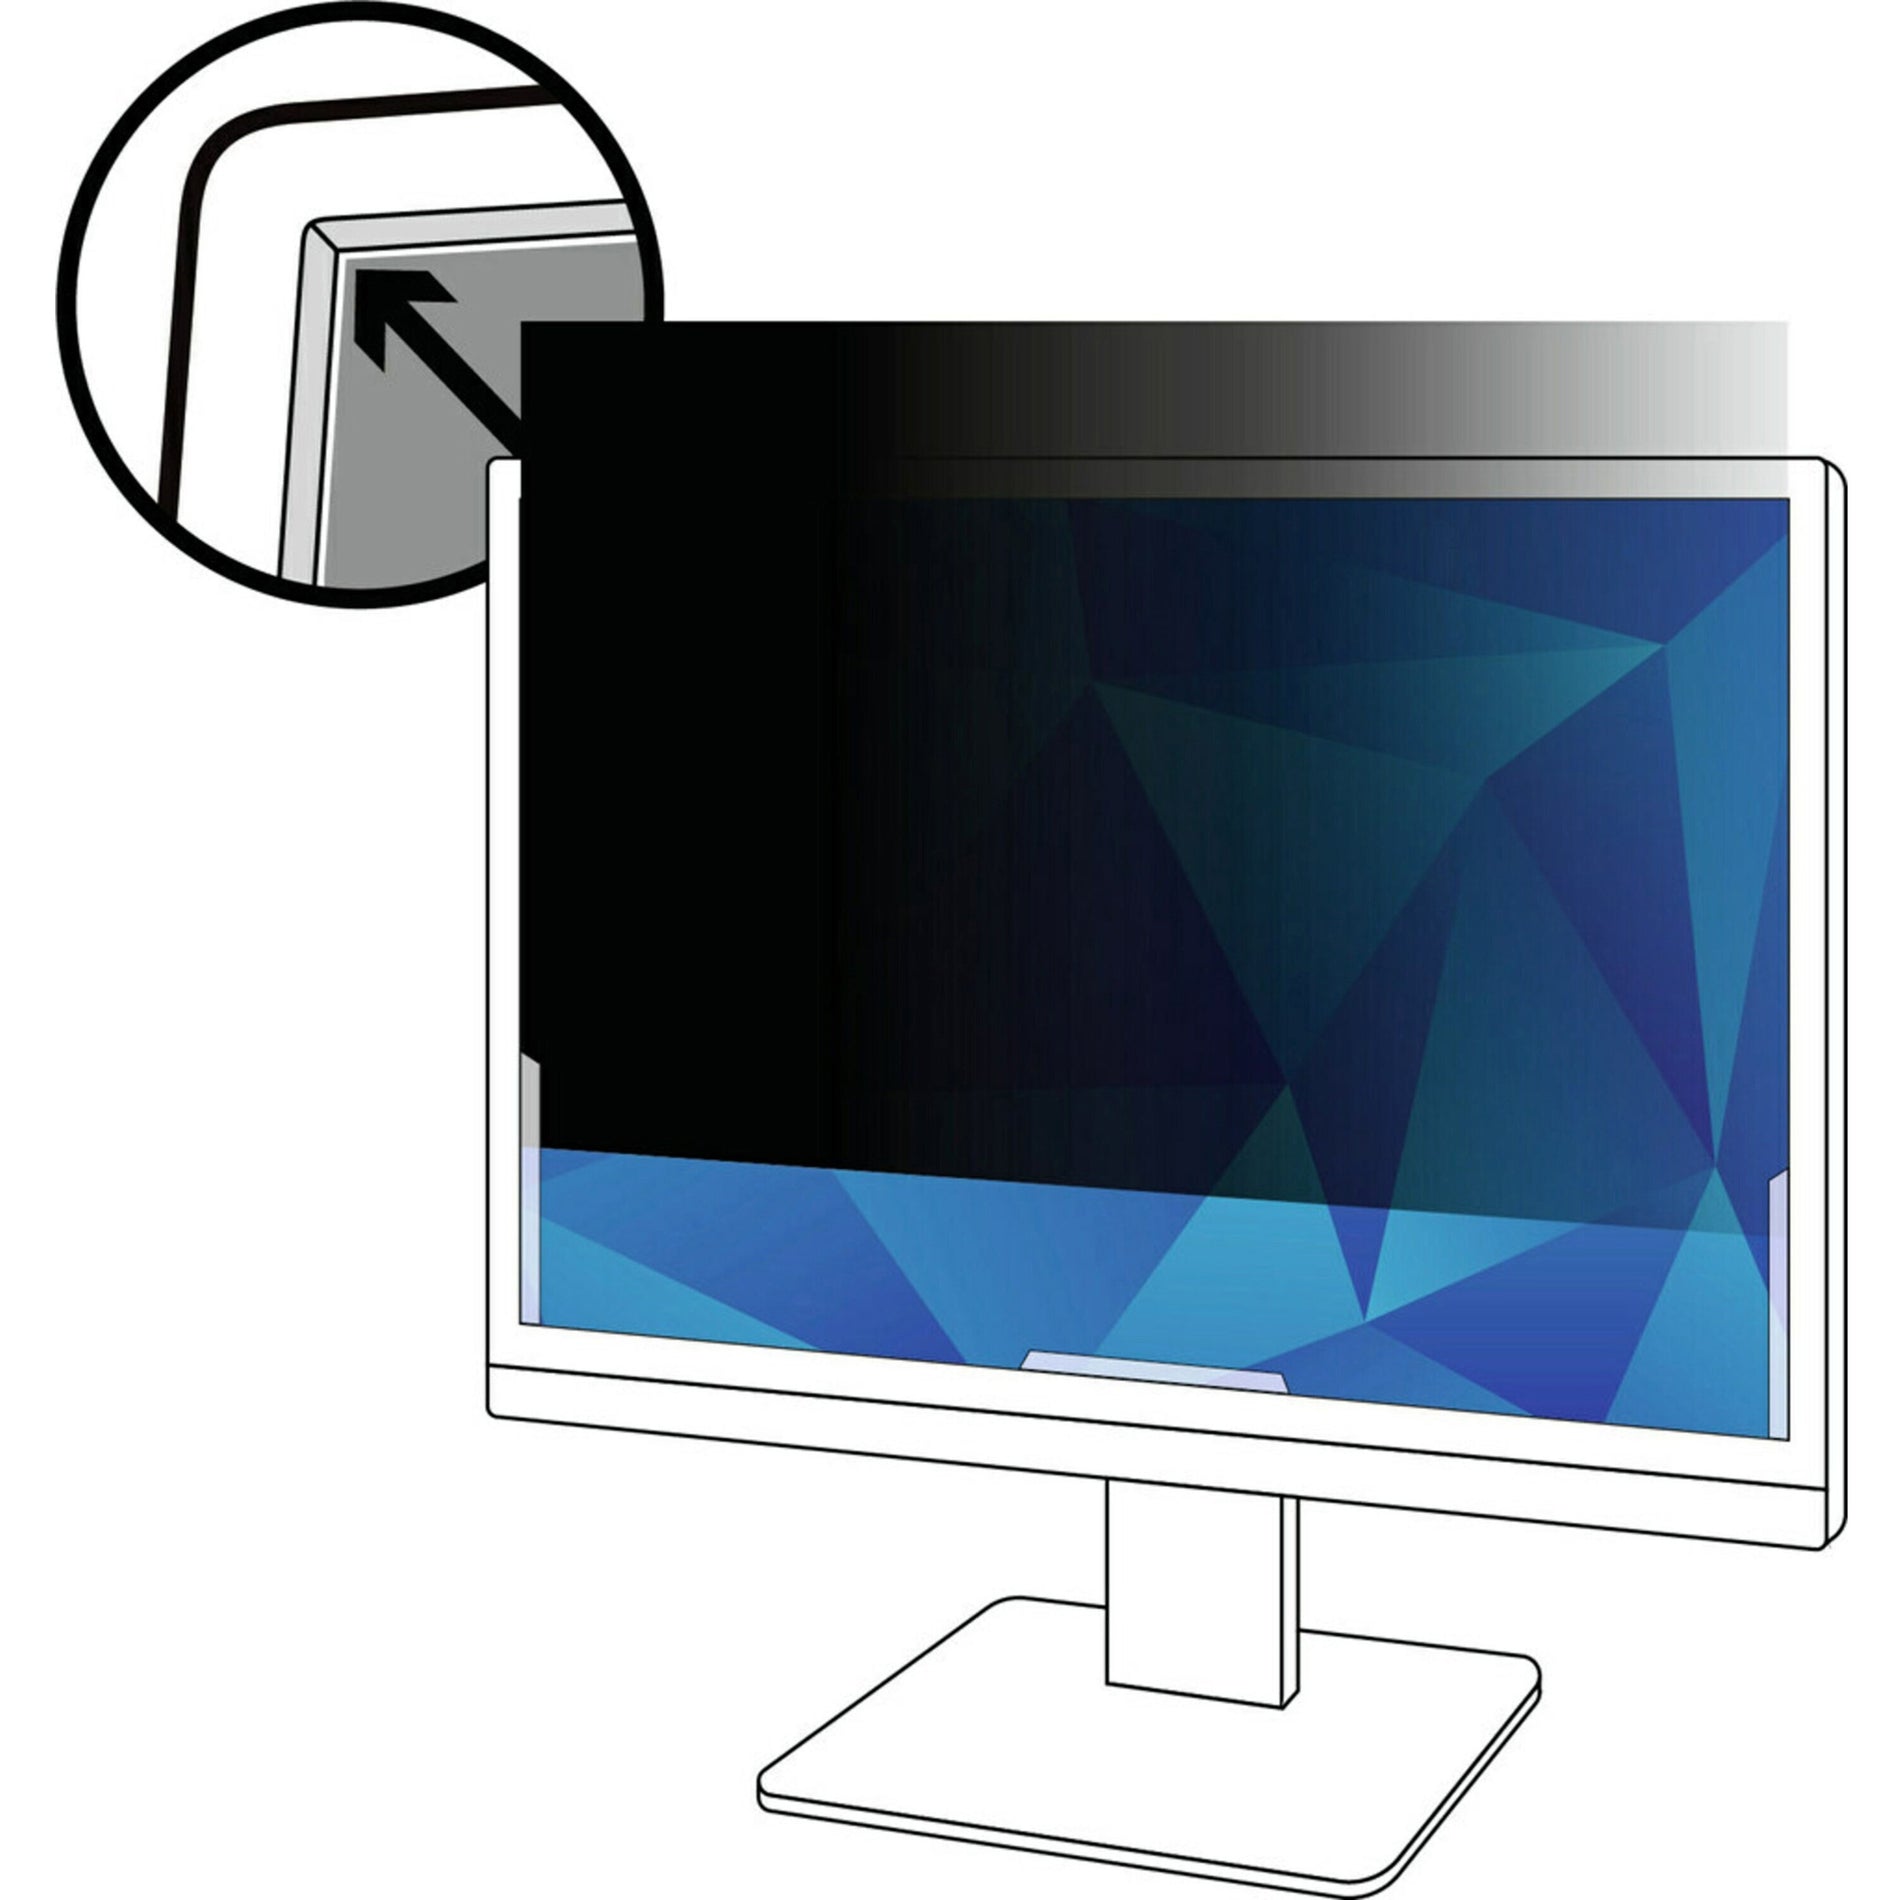 3M PF201W1B Privacy Filter Black Matte, Easy to Apply, Easy Clean, Limited Viewing Angle, 20.1" Widescreen Monitor